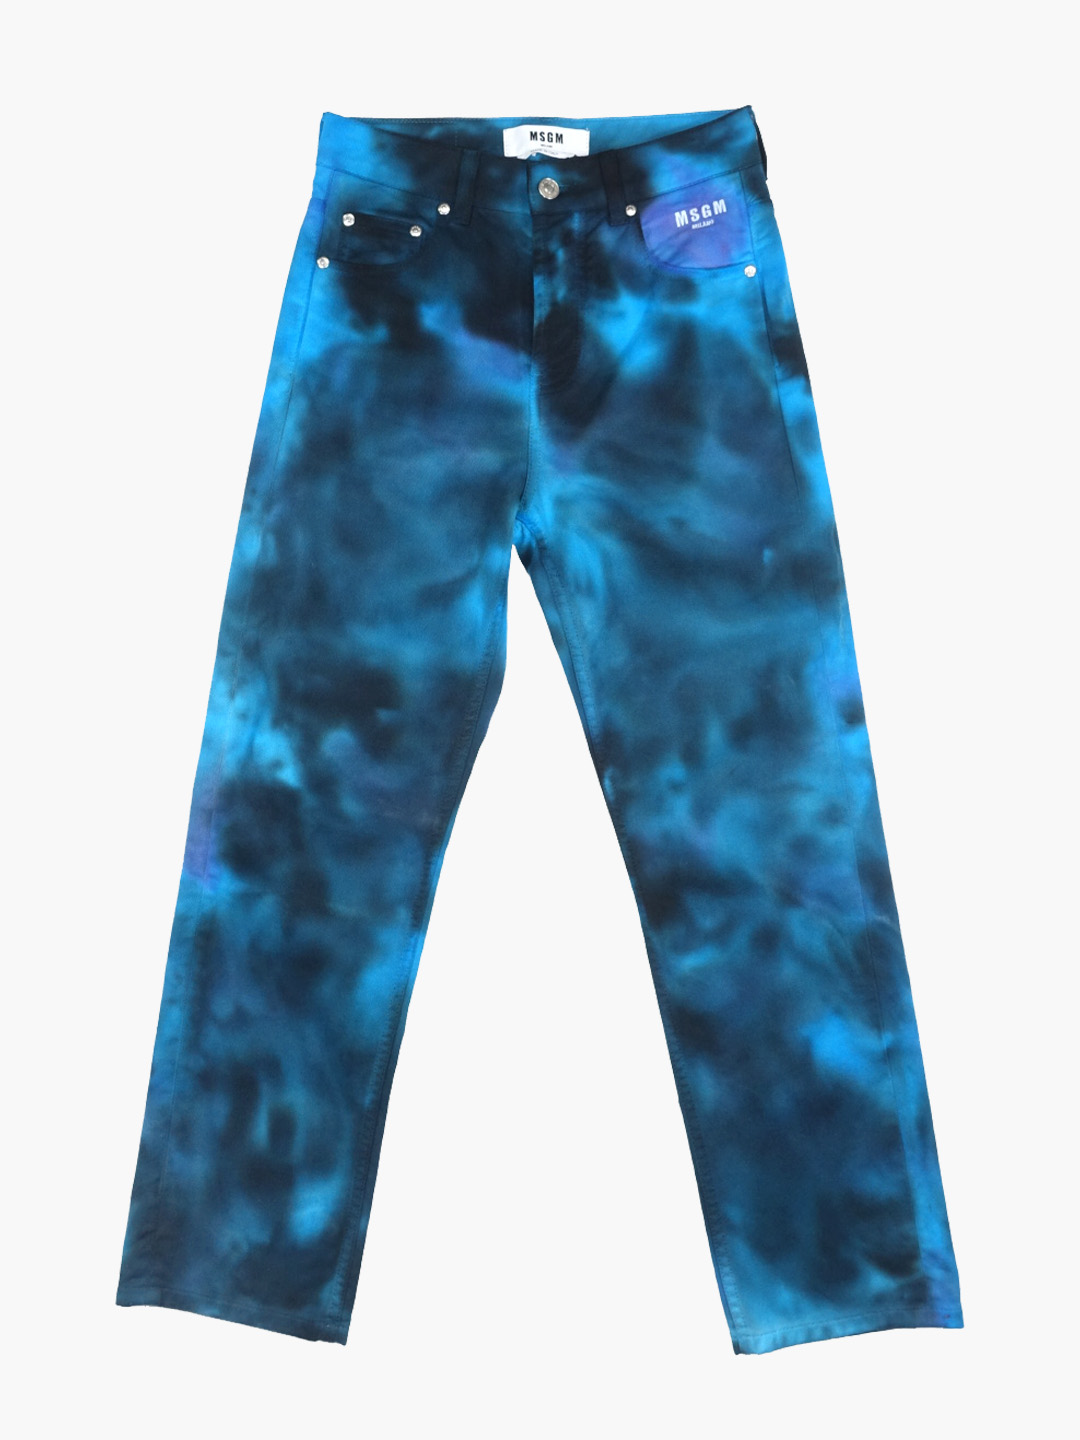 MSGMBleached pants